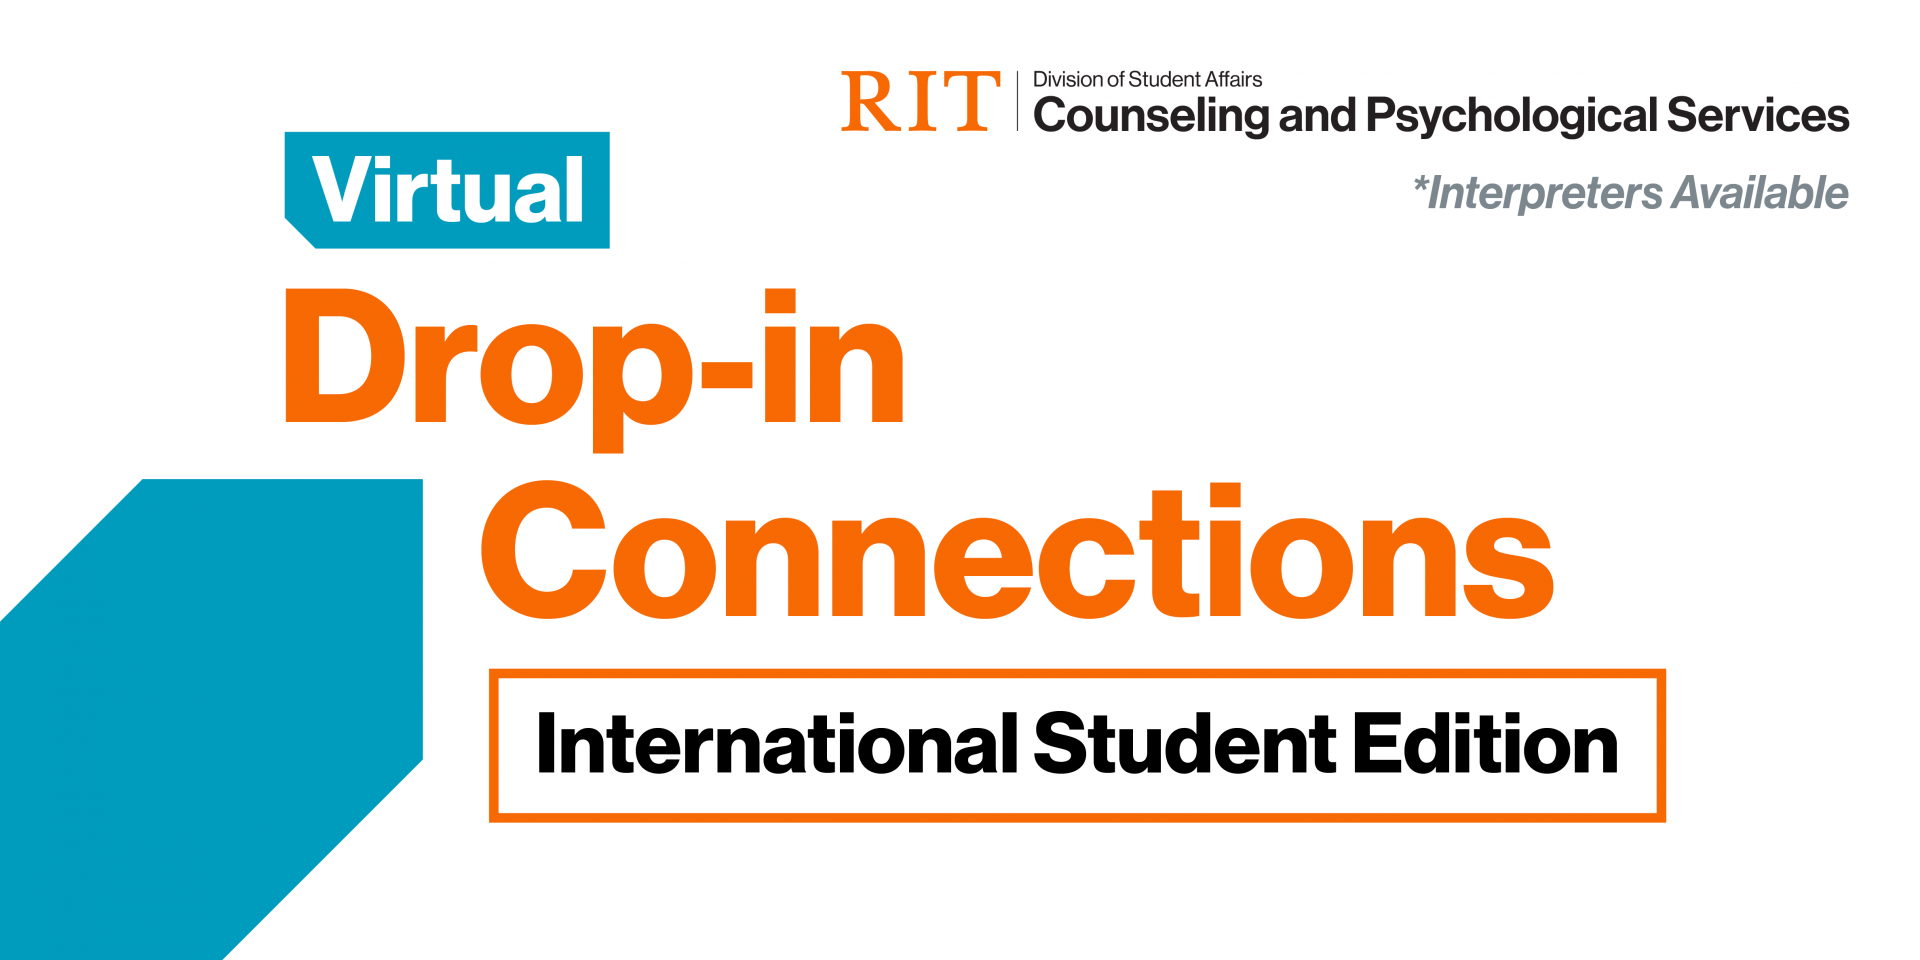 Counseling and Psychological Services Virtual Drop-In Connections: International Student Edition